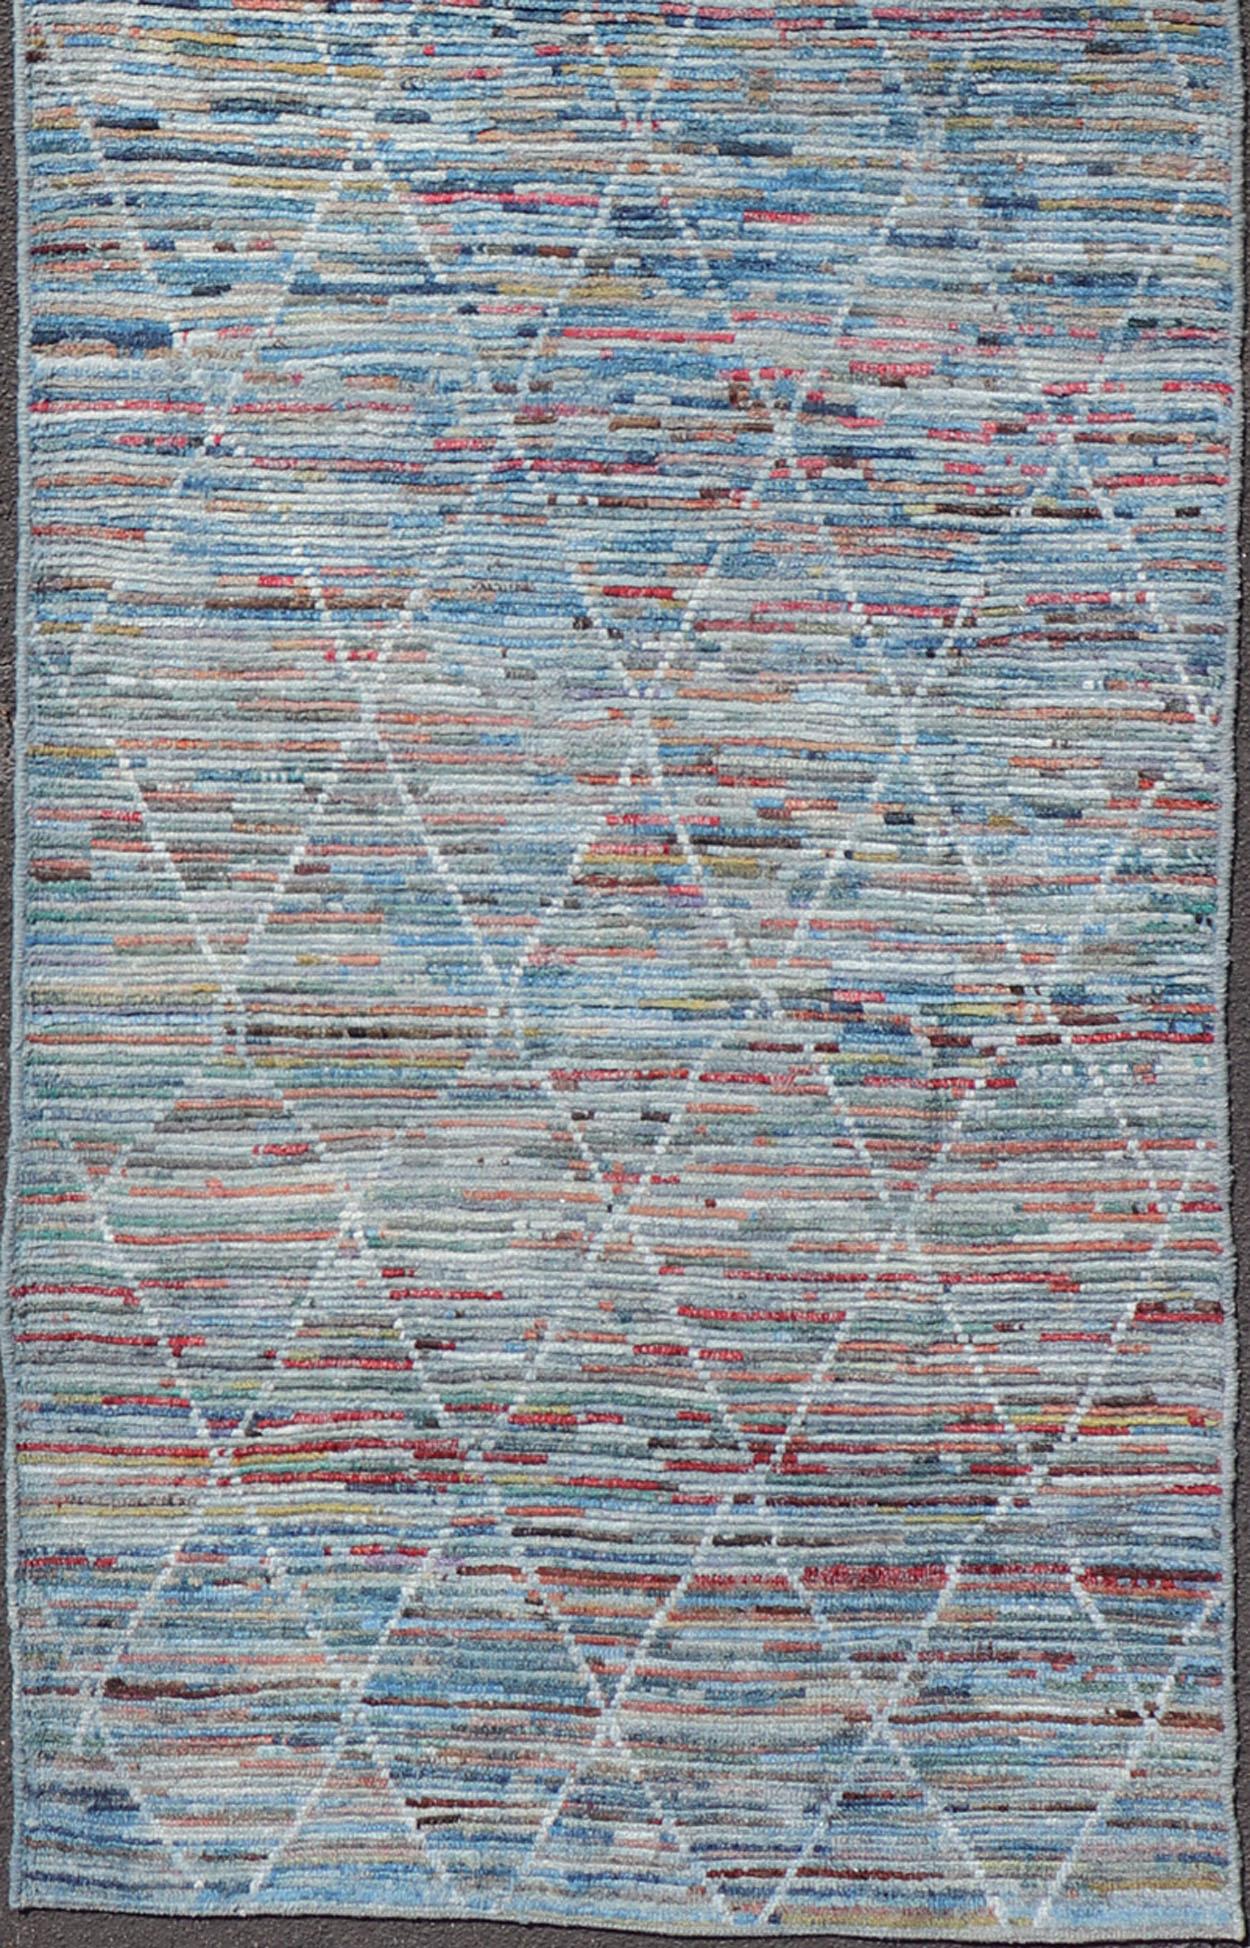 Modern and casual Gallery in Moroccan style with fine wool. Colors include blue, green, red, gray, and yellow. Modern diamond design, Afghan Modern Kilim, Geometric design. Keivan Woven Arts Rug AFG-31924, country of origin / type: Afghanistan /